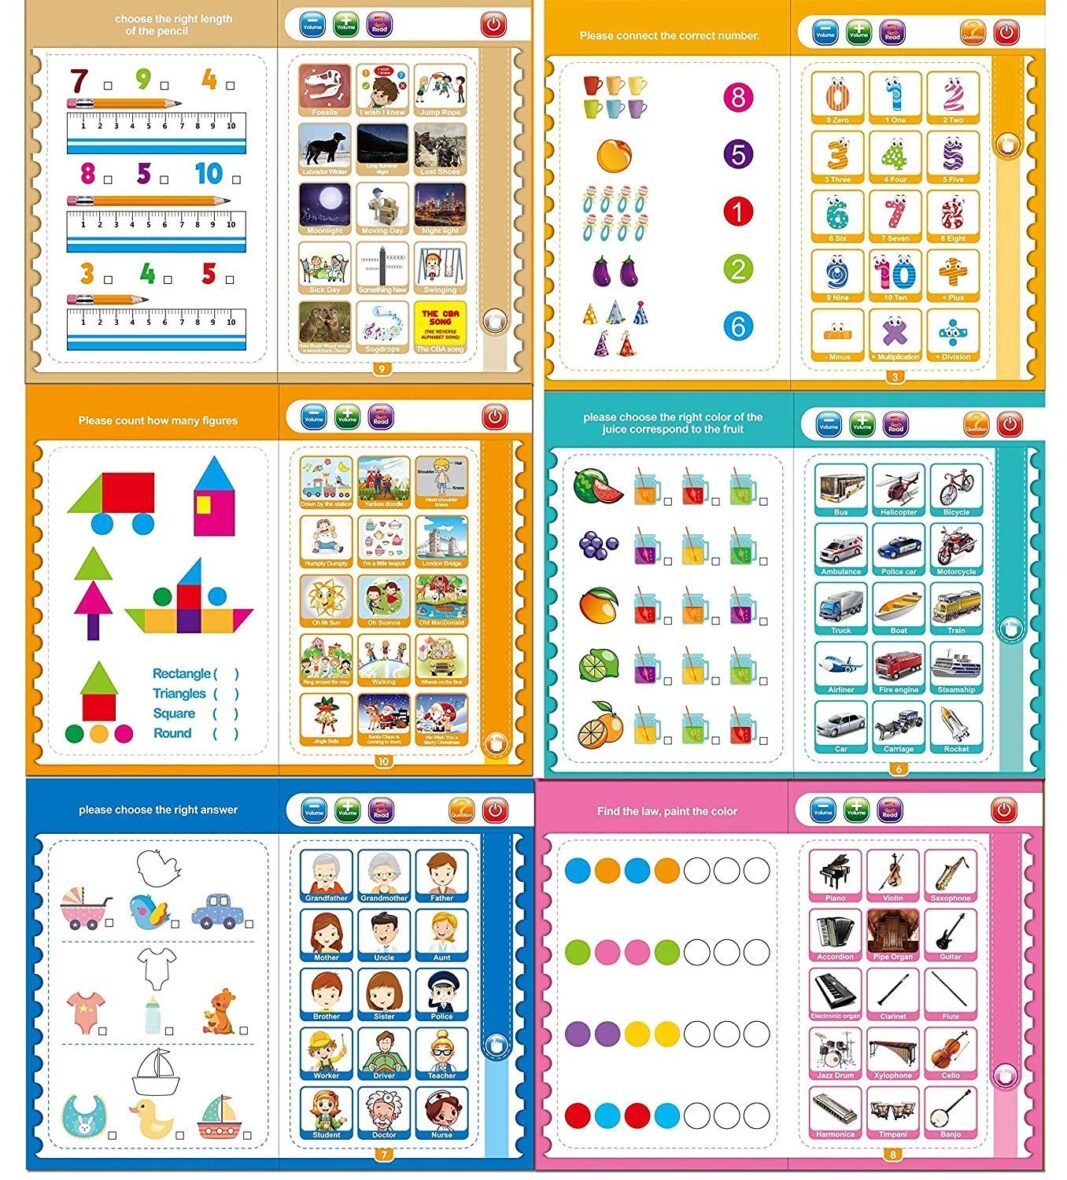 Kids Intelligence Book English Letters & Words Learning Sound Book, Fun Educational Toys. Activities with Numbers, Shapes, Animals Phonetic Learning book for Toddlers.